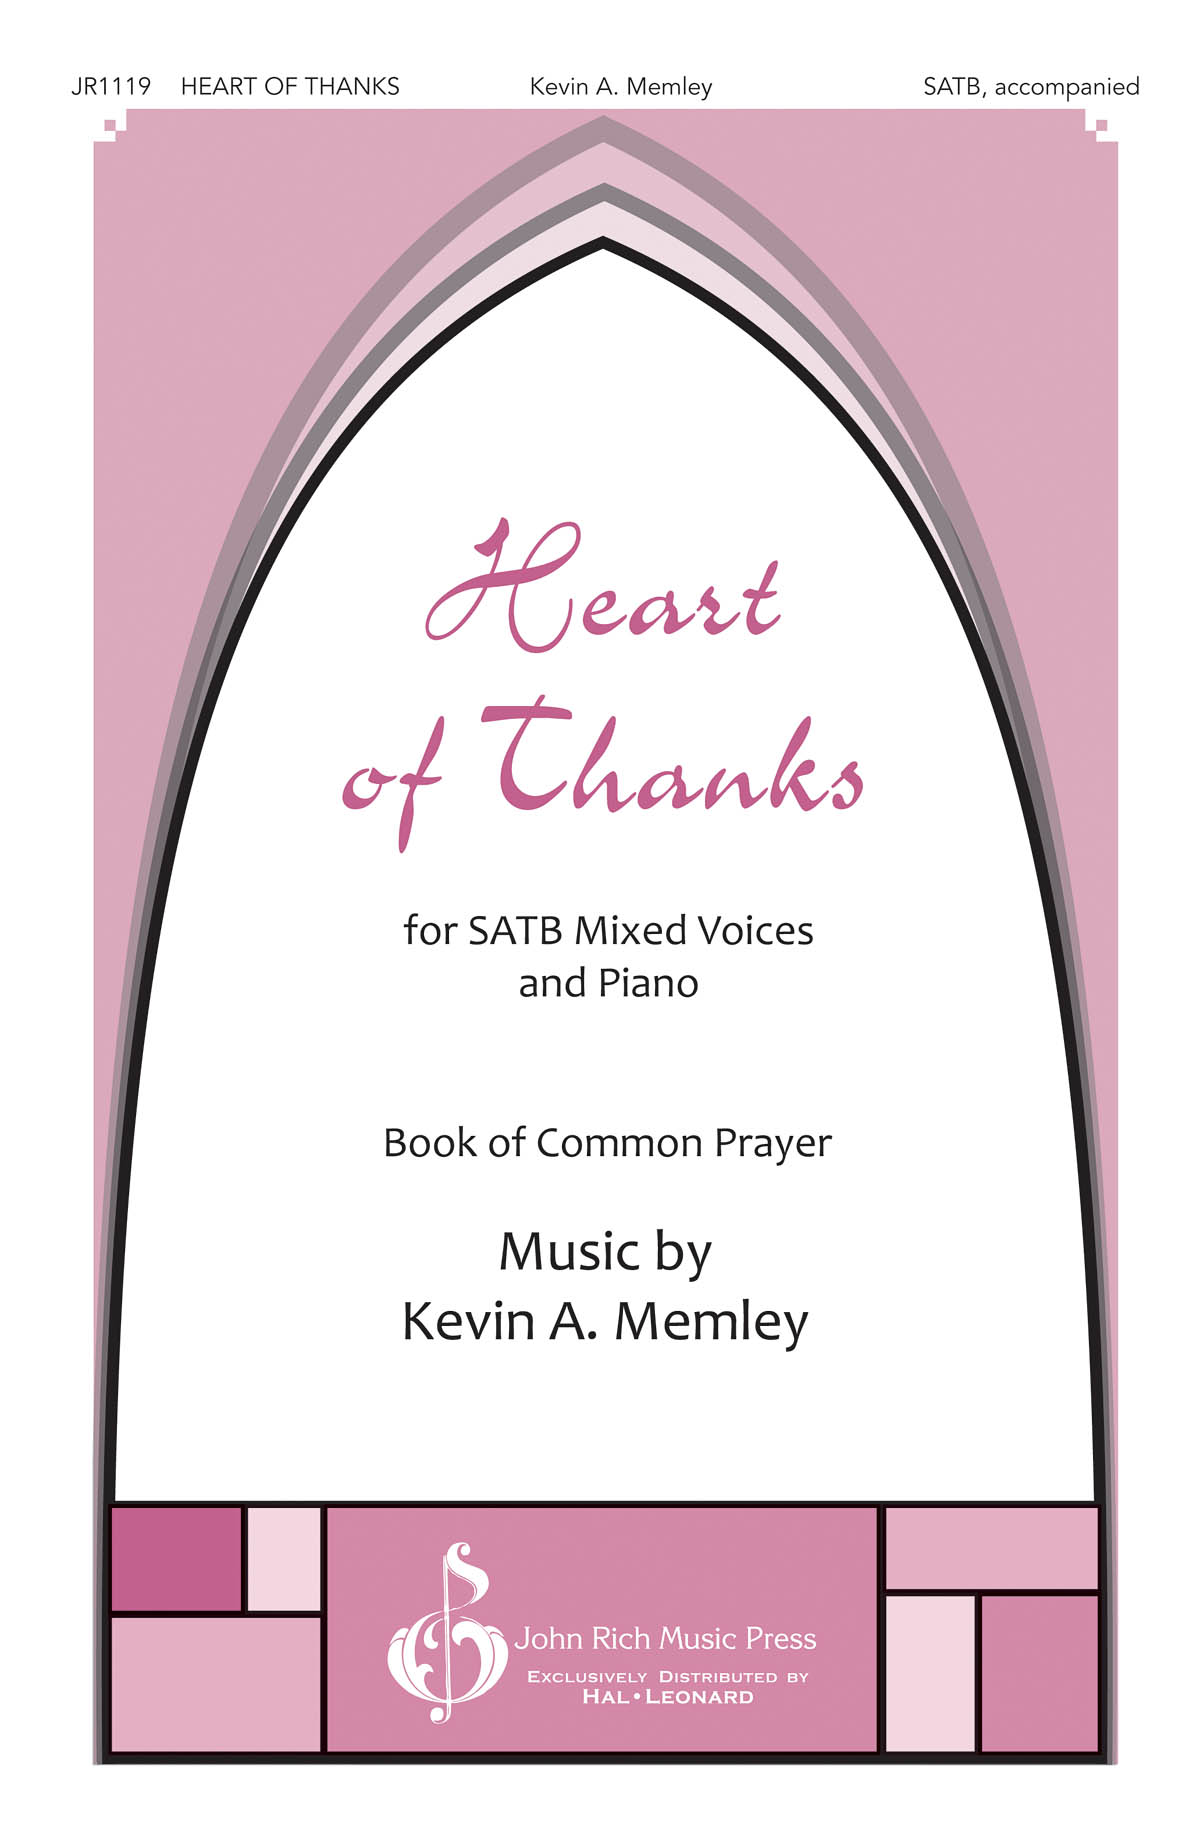 Kevin A. Memley: Heart of Thanks (SATB)